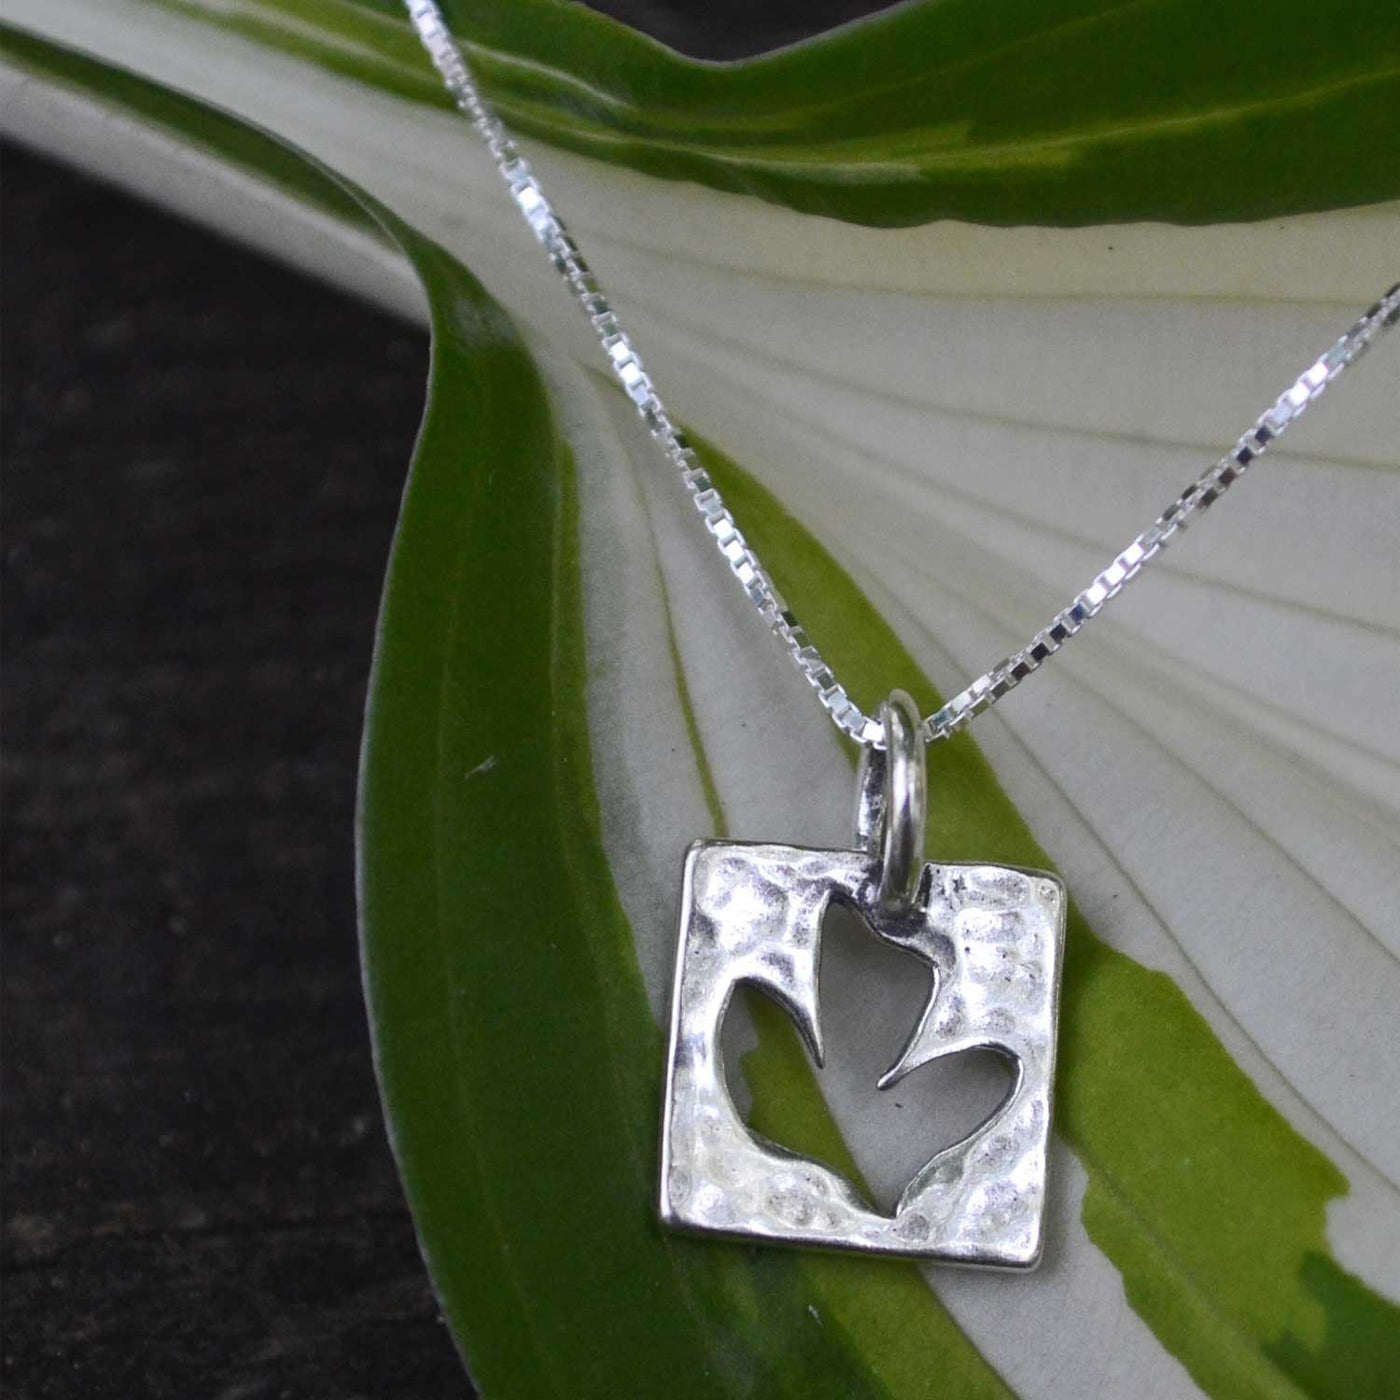 dove-cut-out-necklace-in-sterling-silver-let-your-spirit-soar